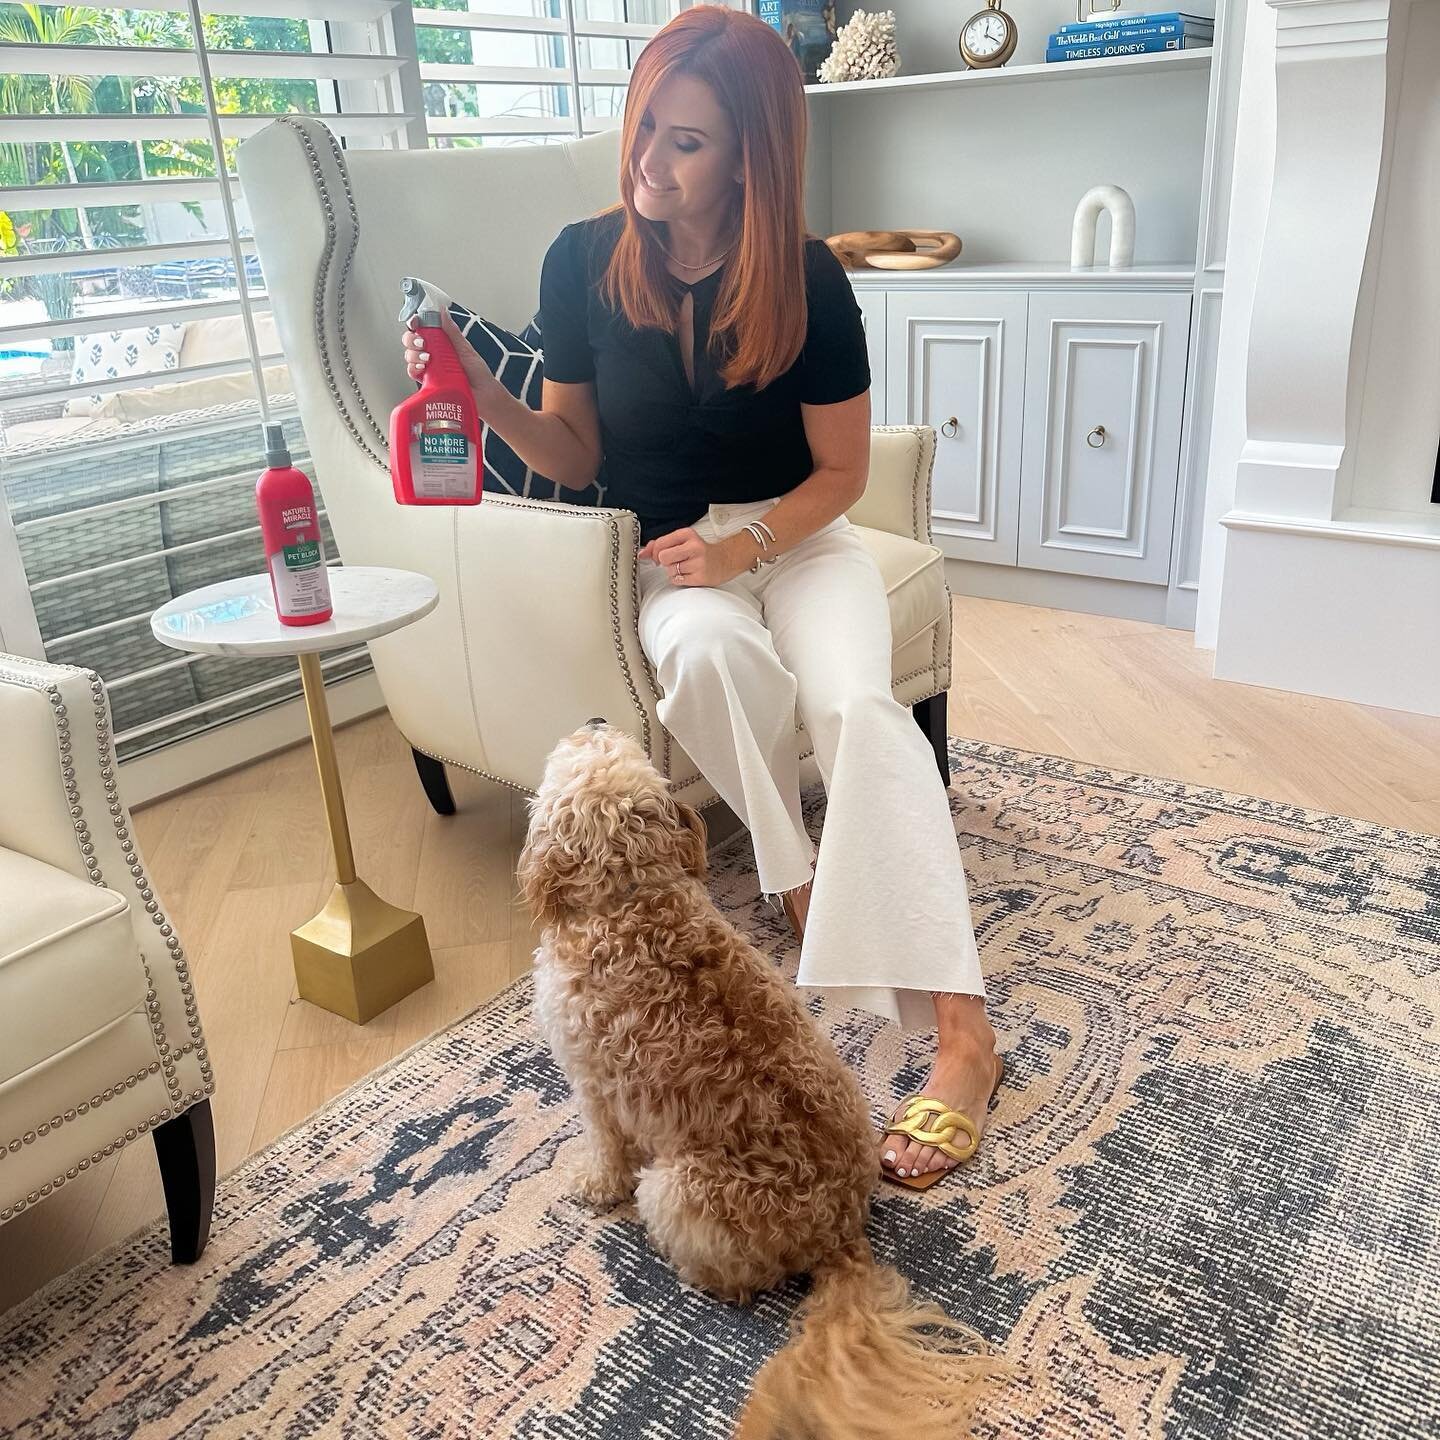 Nothing is worse than your puppy or dog peeing your favorite rug!🥲 This product would be great to use when trying to break dogs' marking behaviors. We have used it when Georgia started marking and it has helped her not to do it again. ✨What I love a